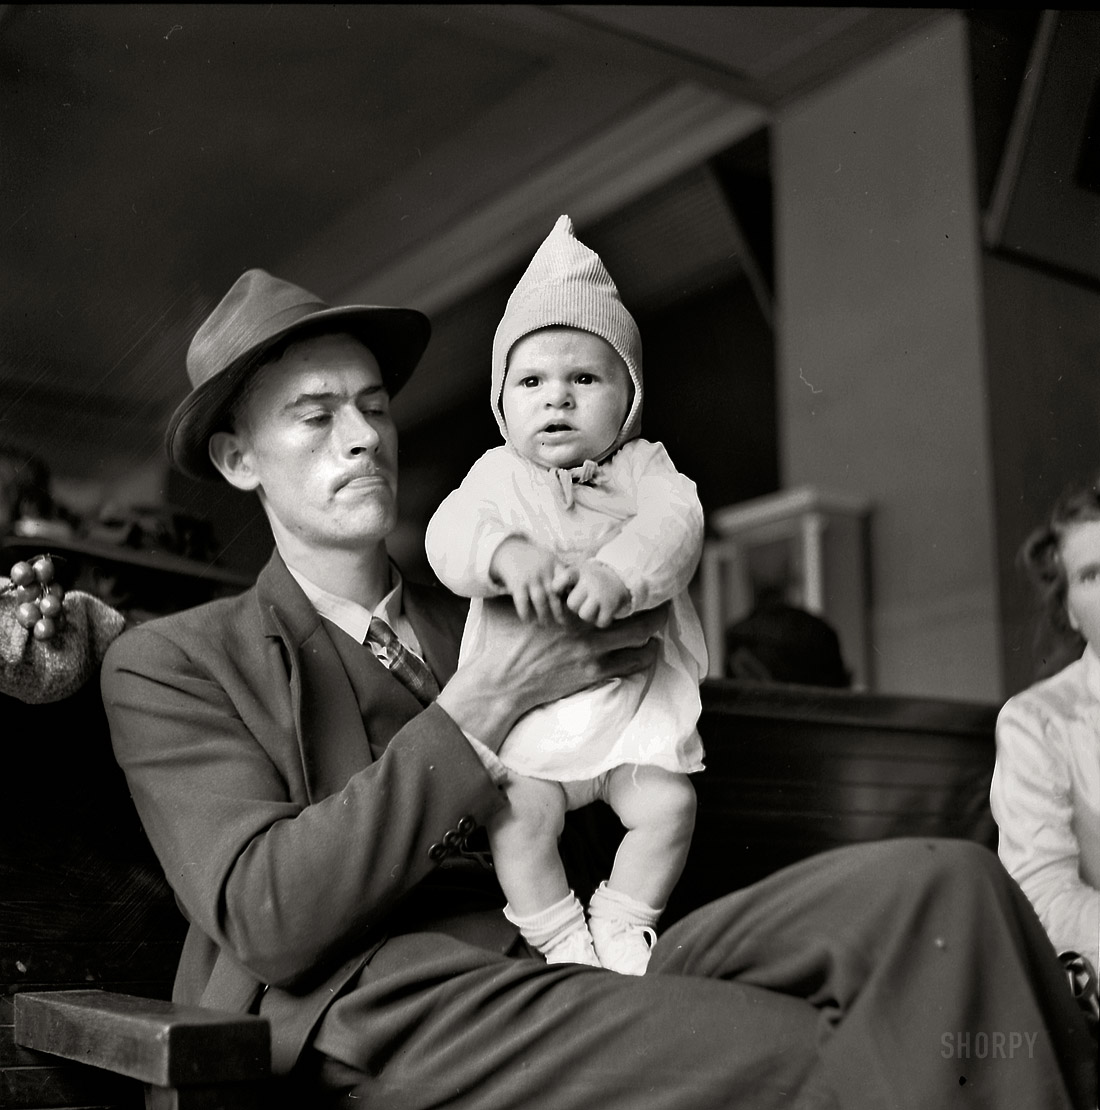 September 1943. "Greyhound bus trip from Louisville, Kentucky, to Memphis, Tennessee, and the terminals." Medium-format nitrate negative by Esther Bubley for the Office of War Information. View full size.